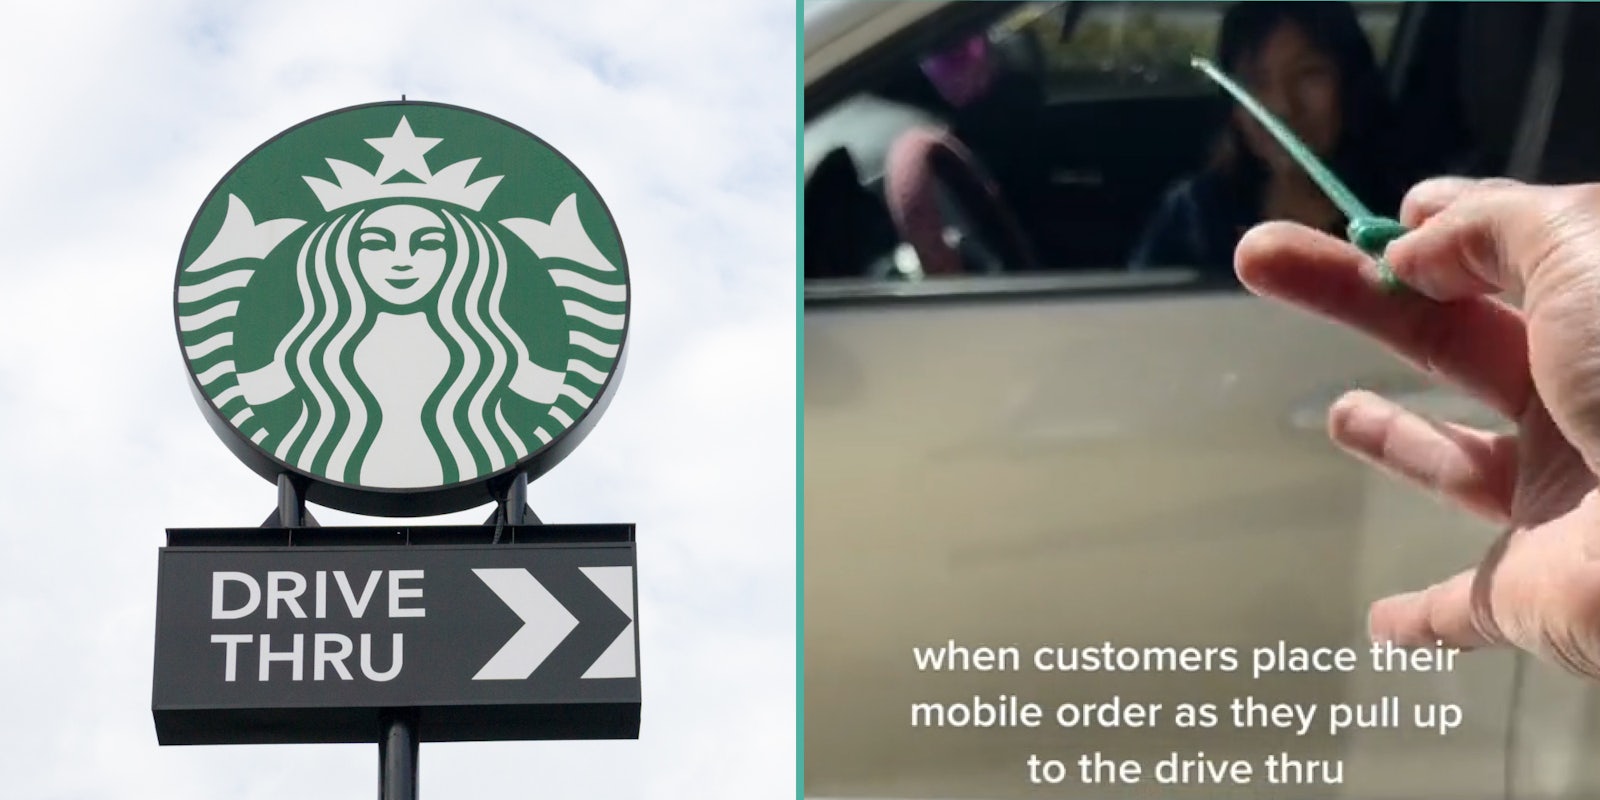 Starbucks Drive Thru sign with sky behind (l) Starbucks drive thru window worker holding out stirring stick as a wand at customer at window in car caption 'when customers place their mobile order as they pull up to the drive thru'